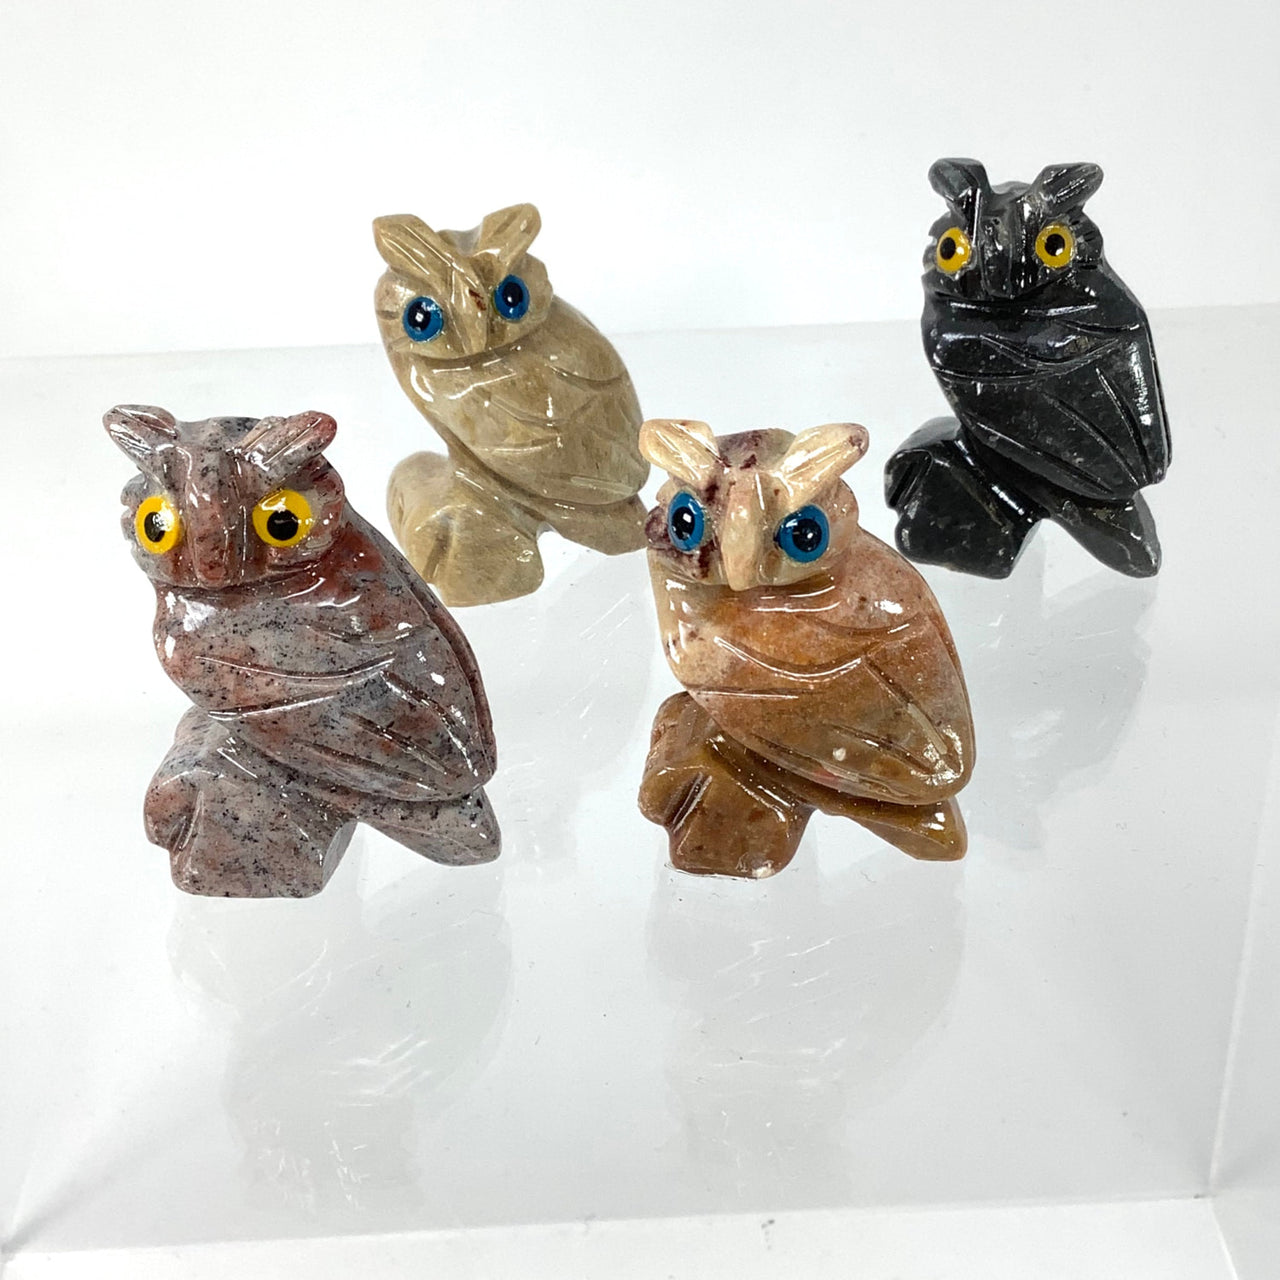 Soapstone carving of three baby owls on white surface, Peruvian craft #C005D